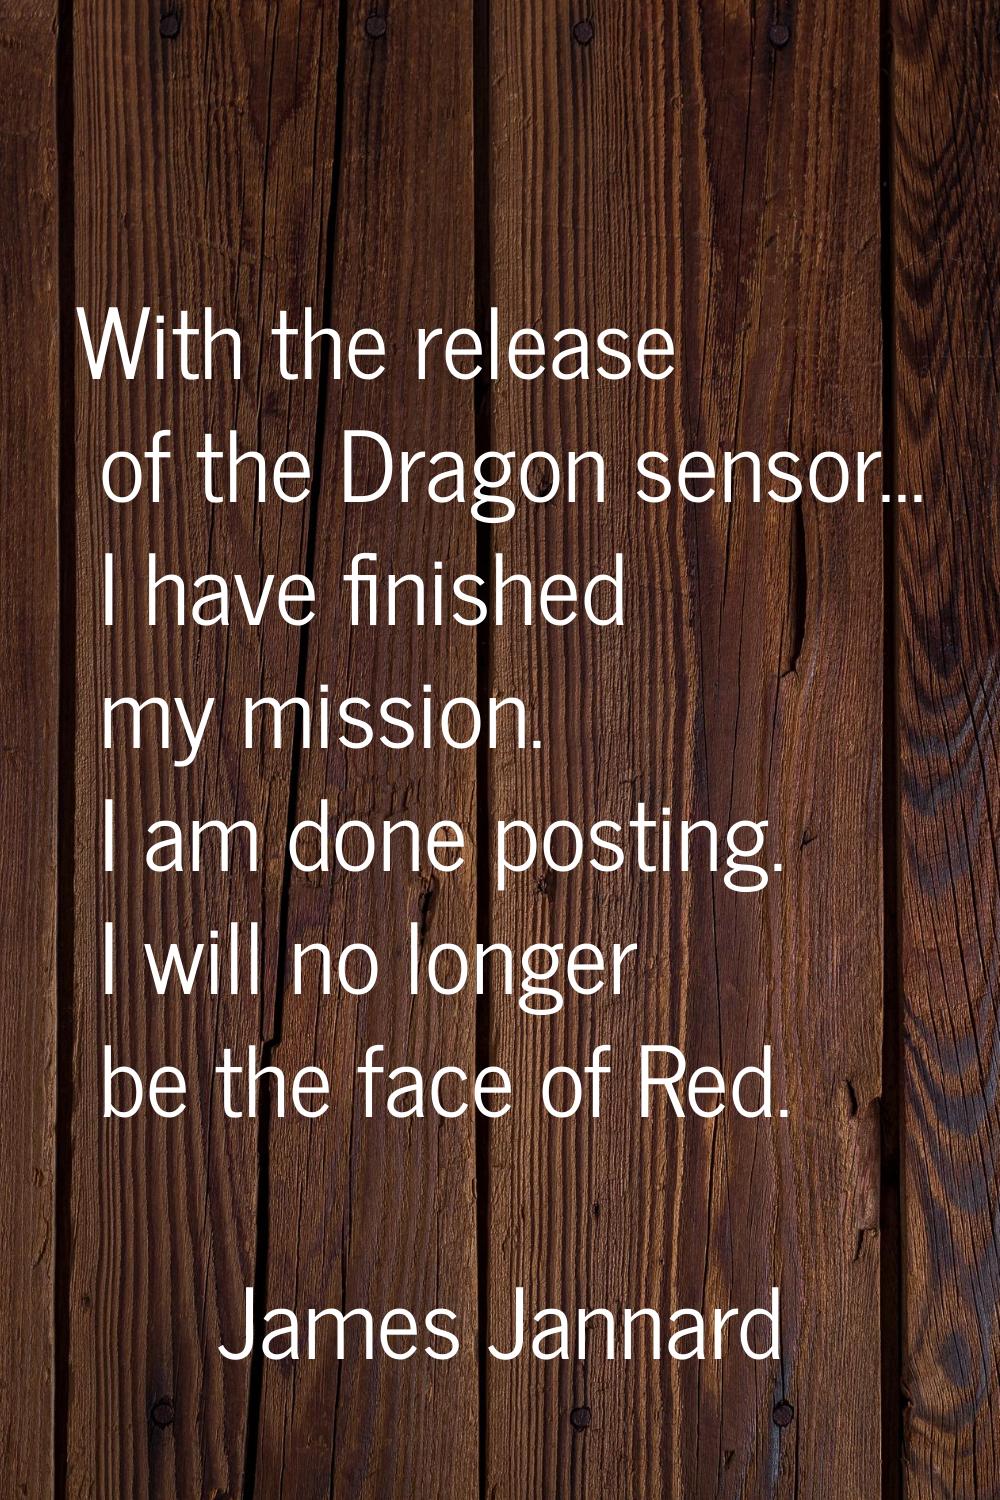 With the release of the Dragon sensor... I have finished my mission. I am done posting. I will no l